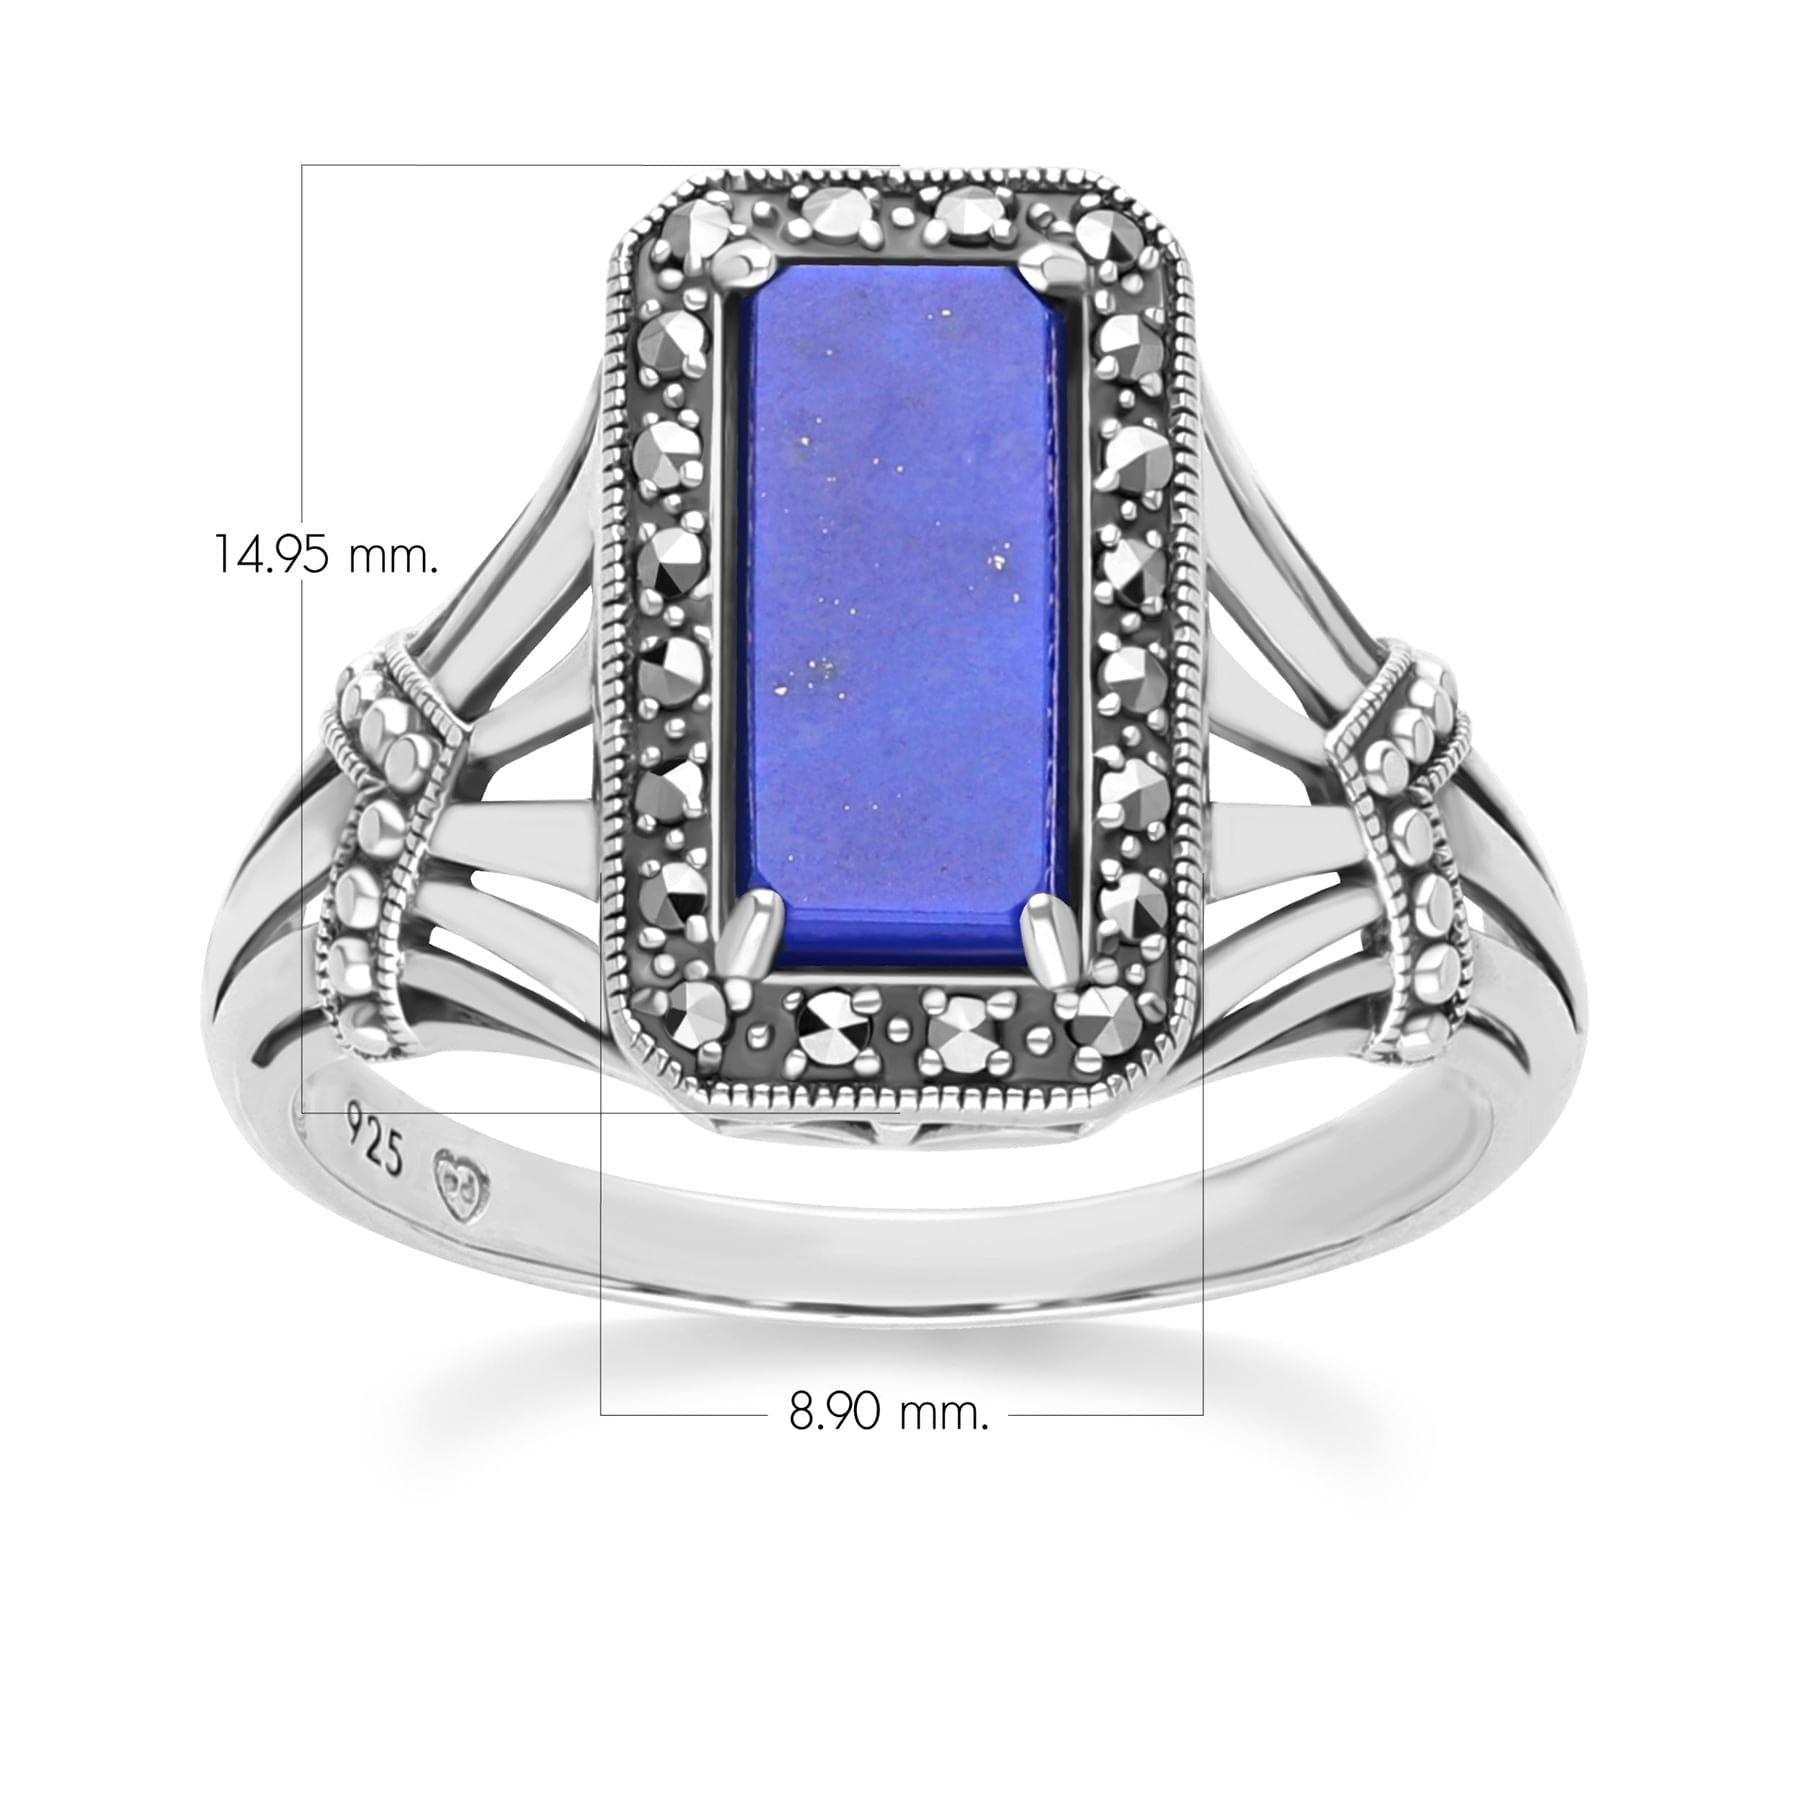 Art Deco Style Octagon Lapis Lazuli and Marcasite Ring in Sterling Silver 214R642002925 Dimensions